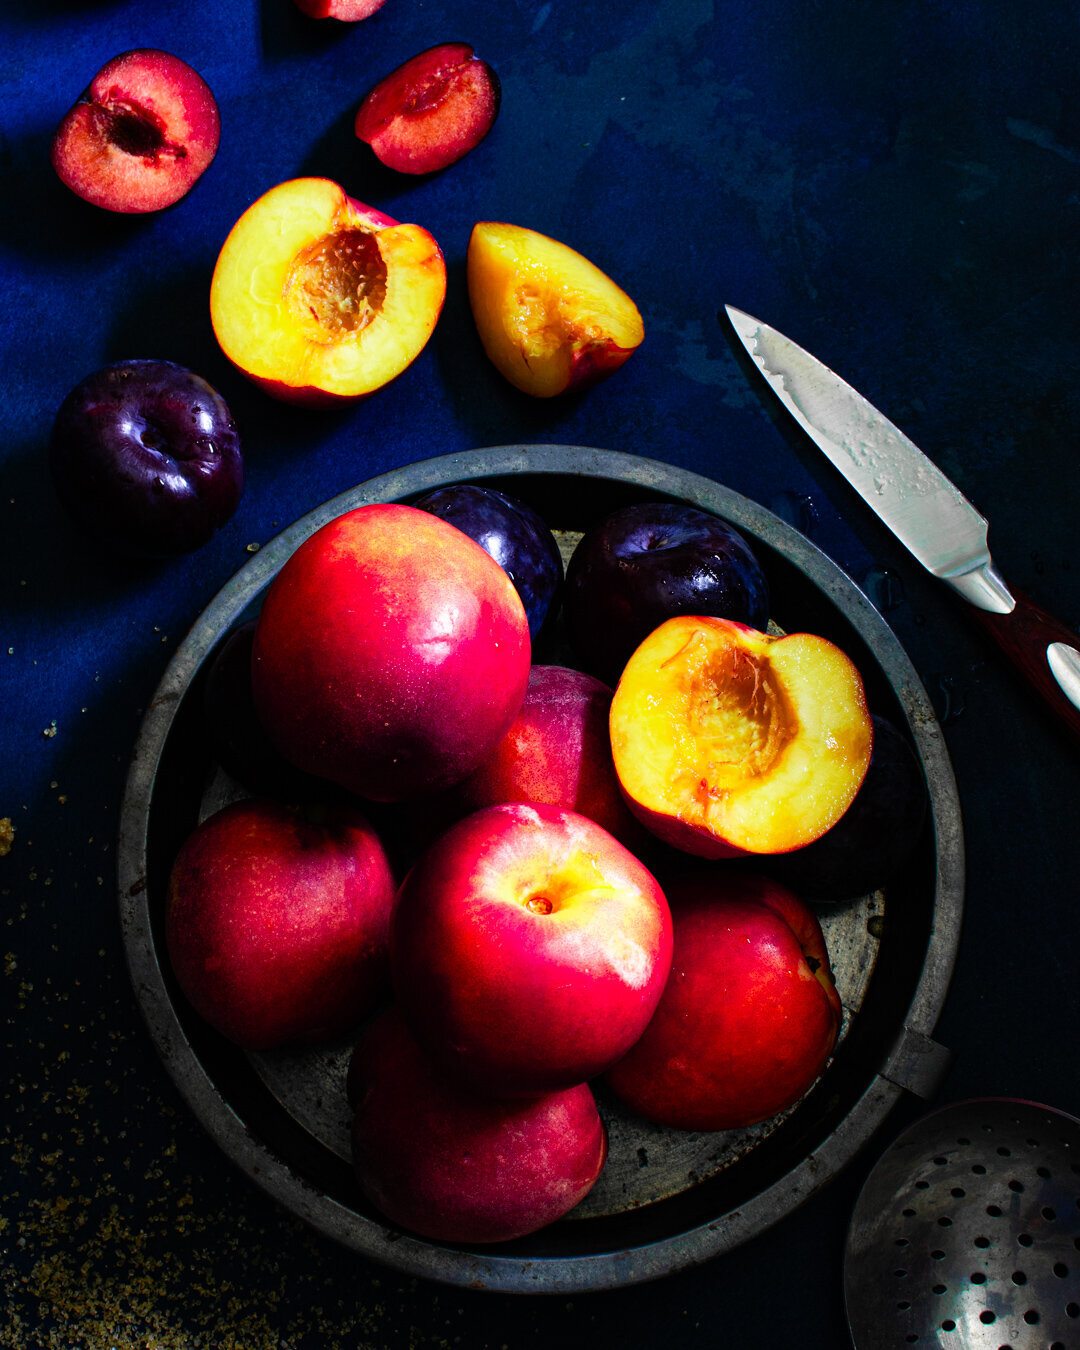 Nectarines and plums in a bowl with a knife